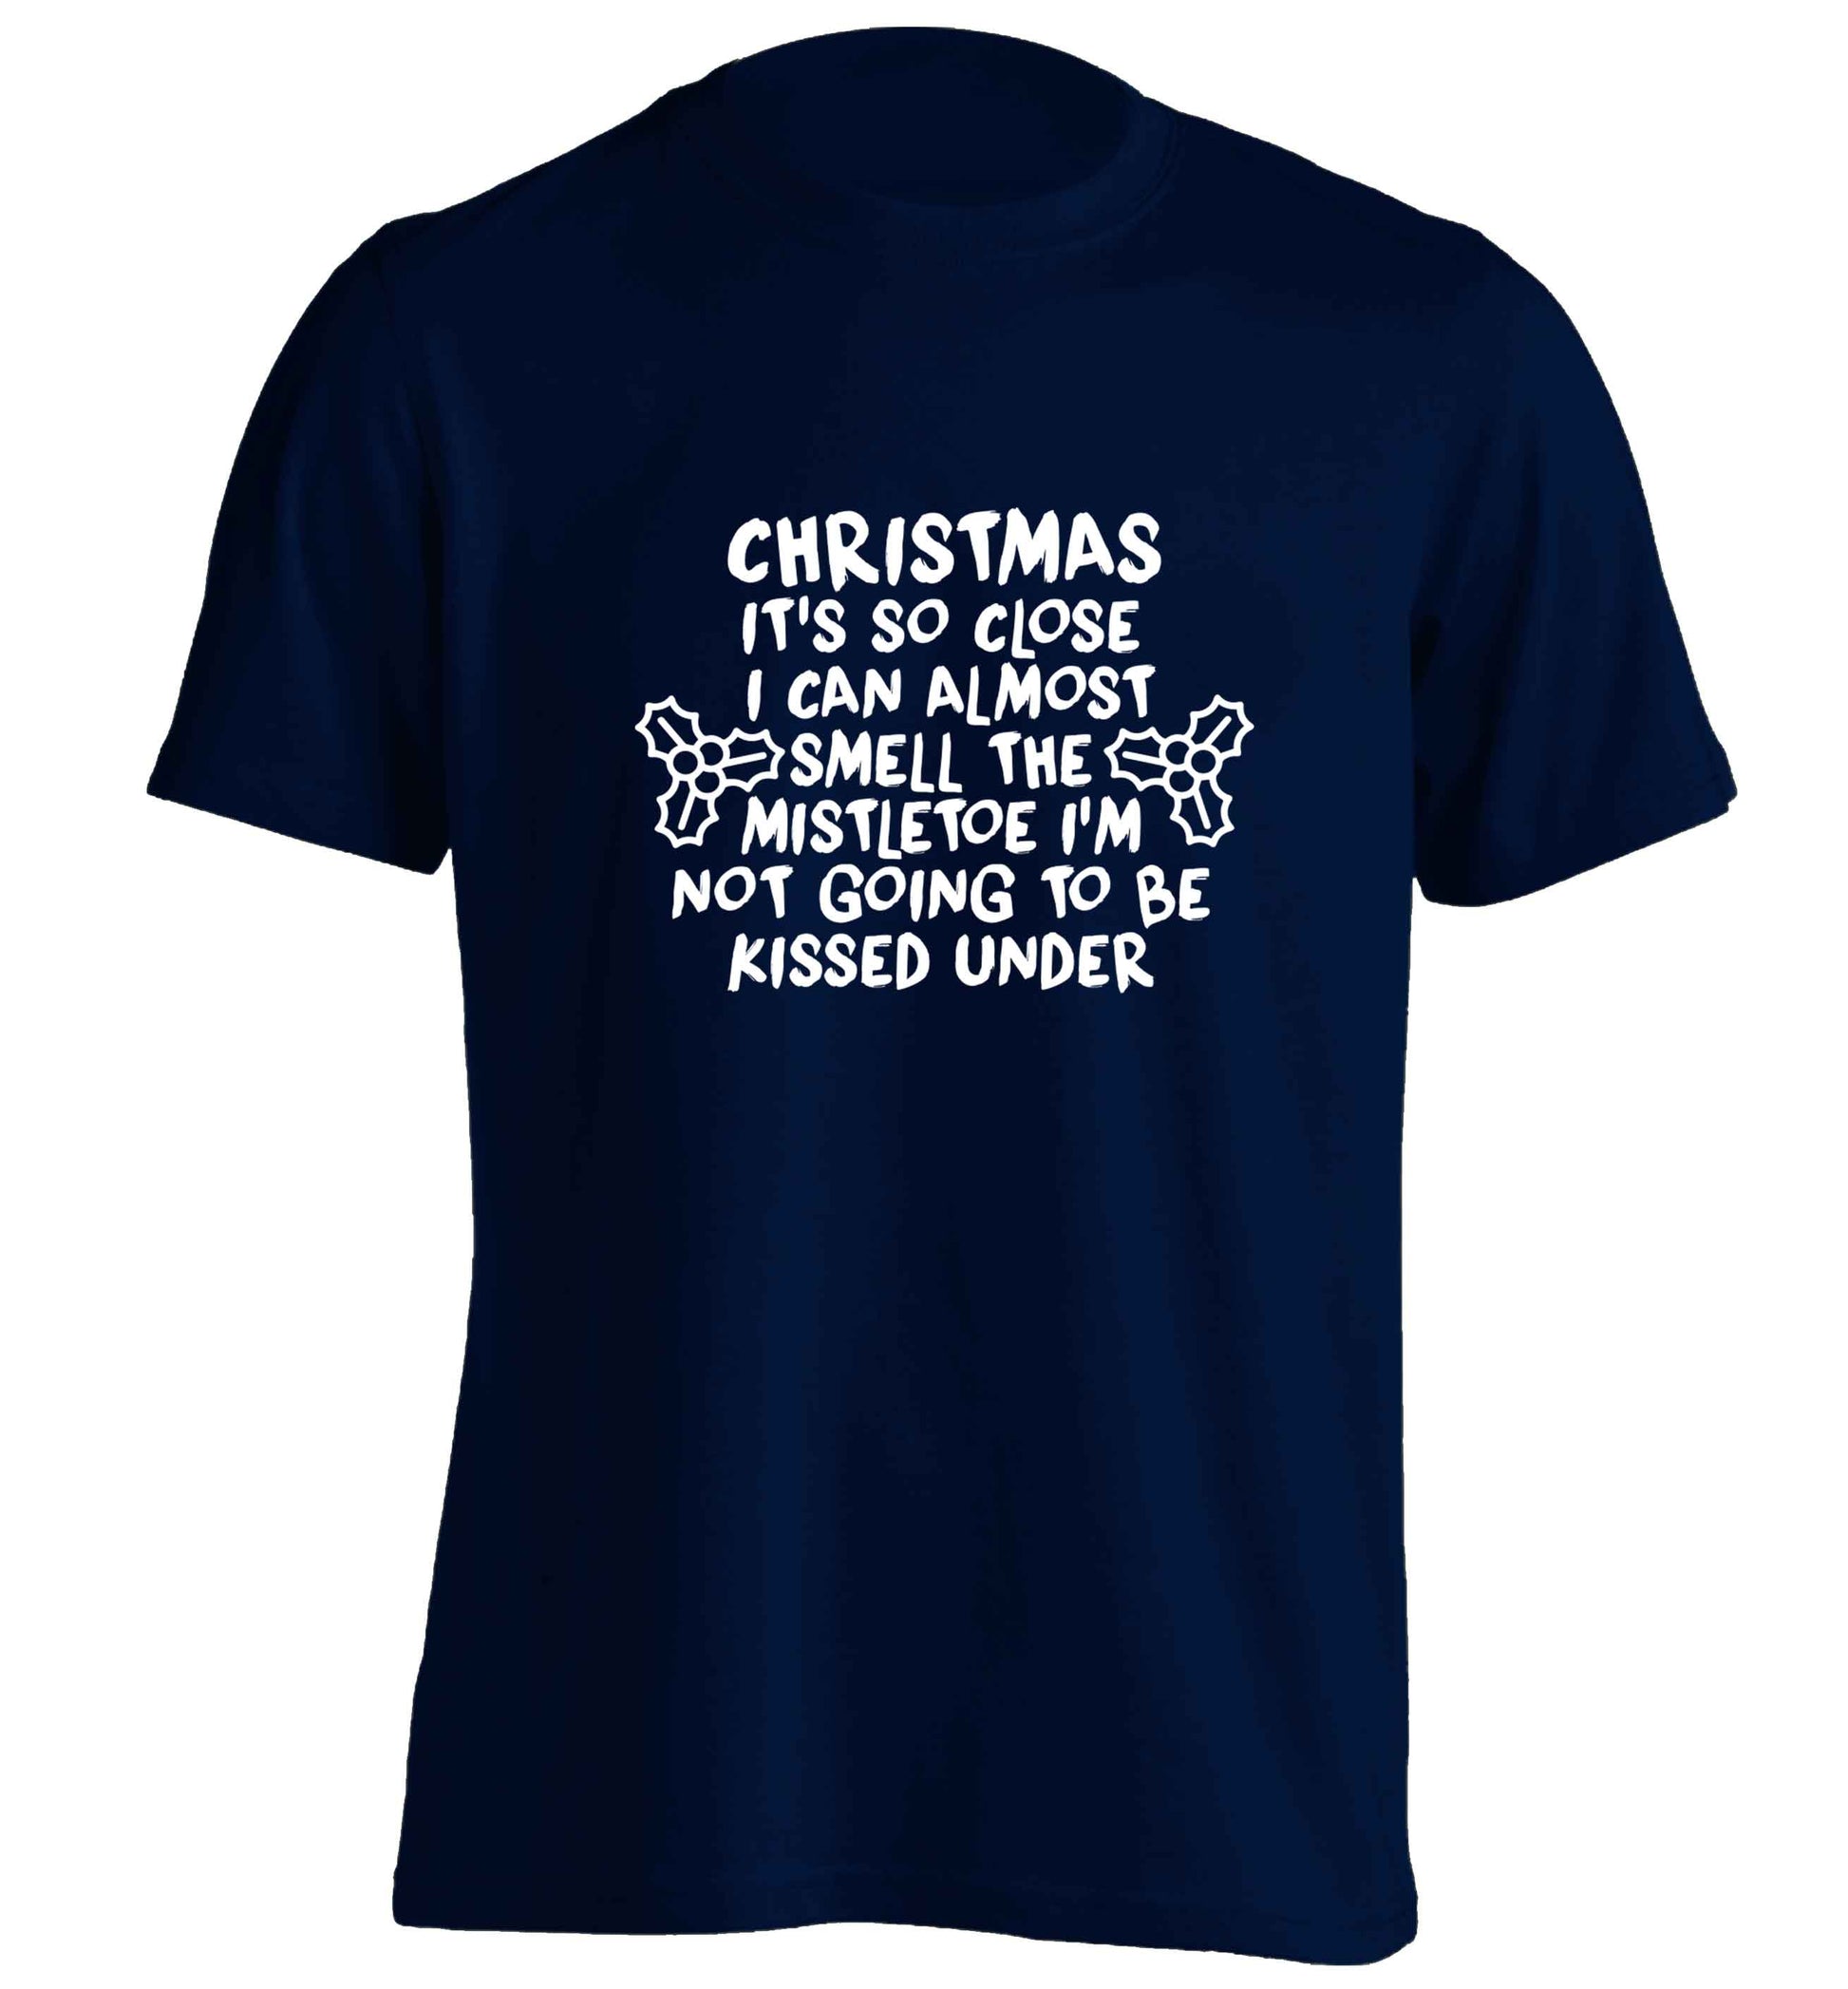 Christmas it's so close I can almost smell the misteltoe I'm not going to be kissed under adults unisex navy Tshirt 2XL